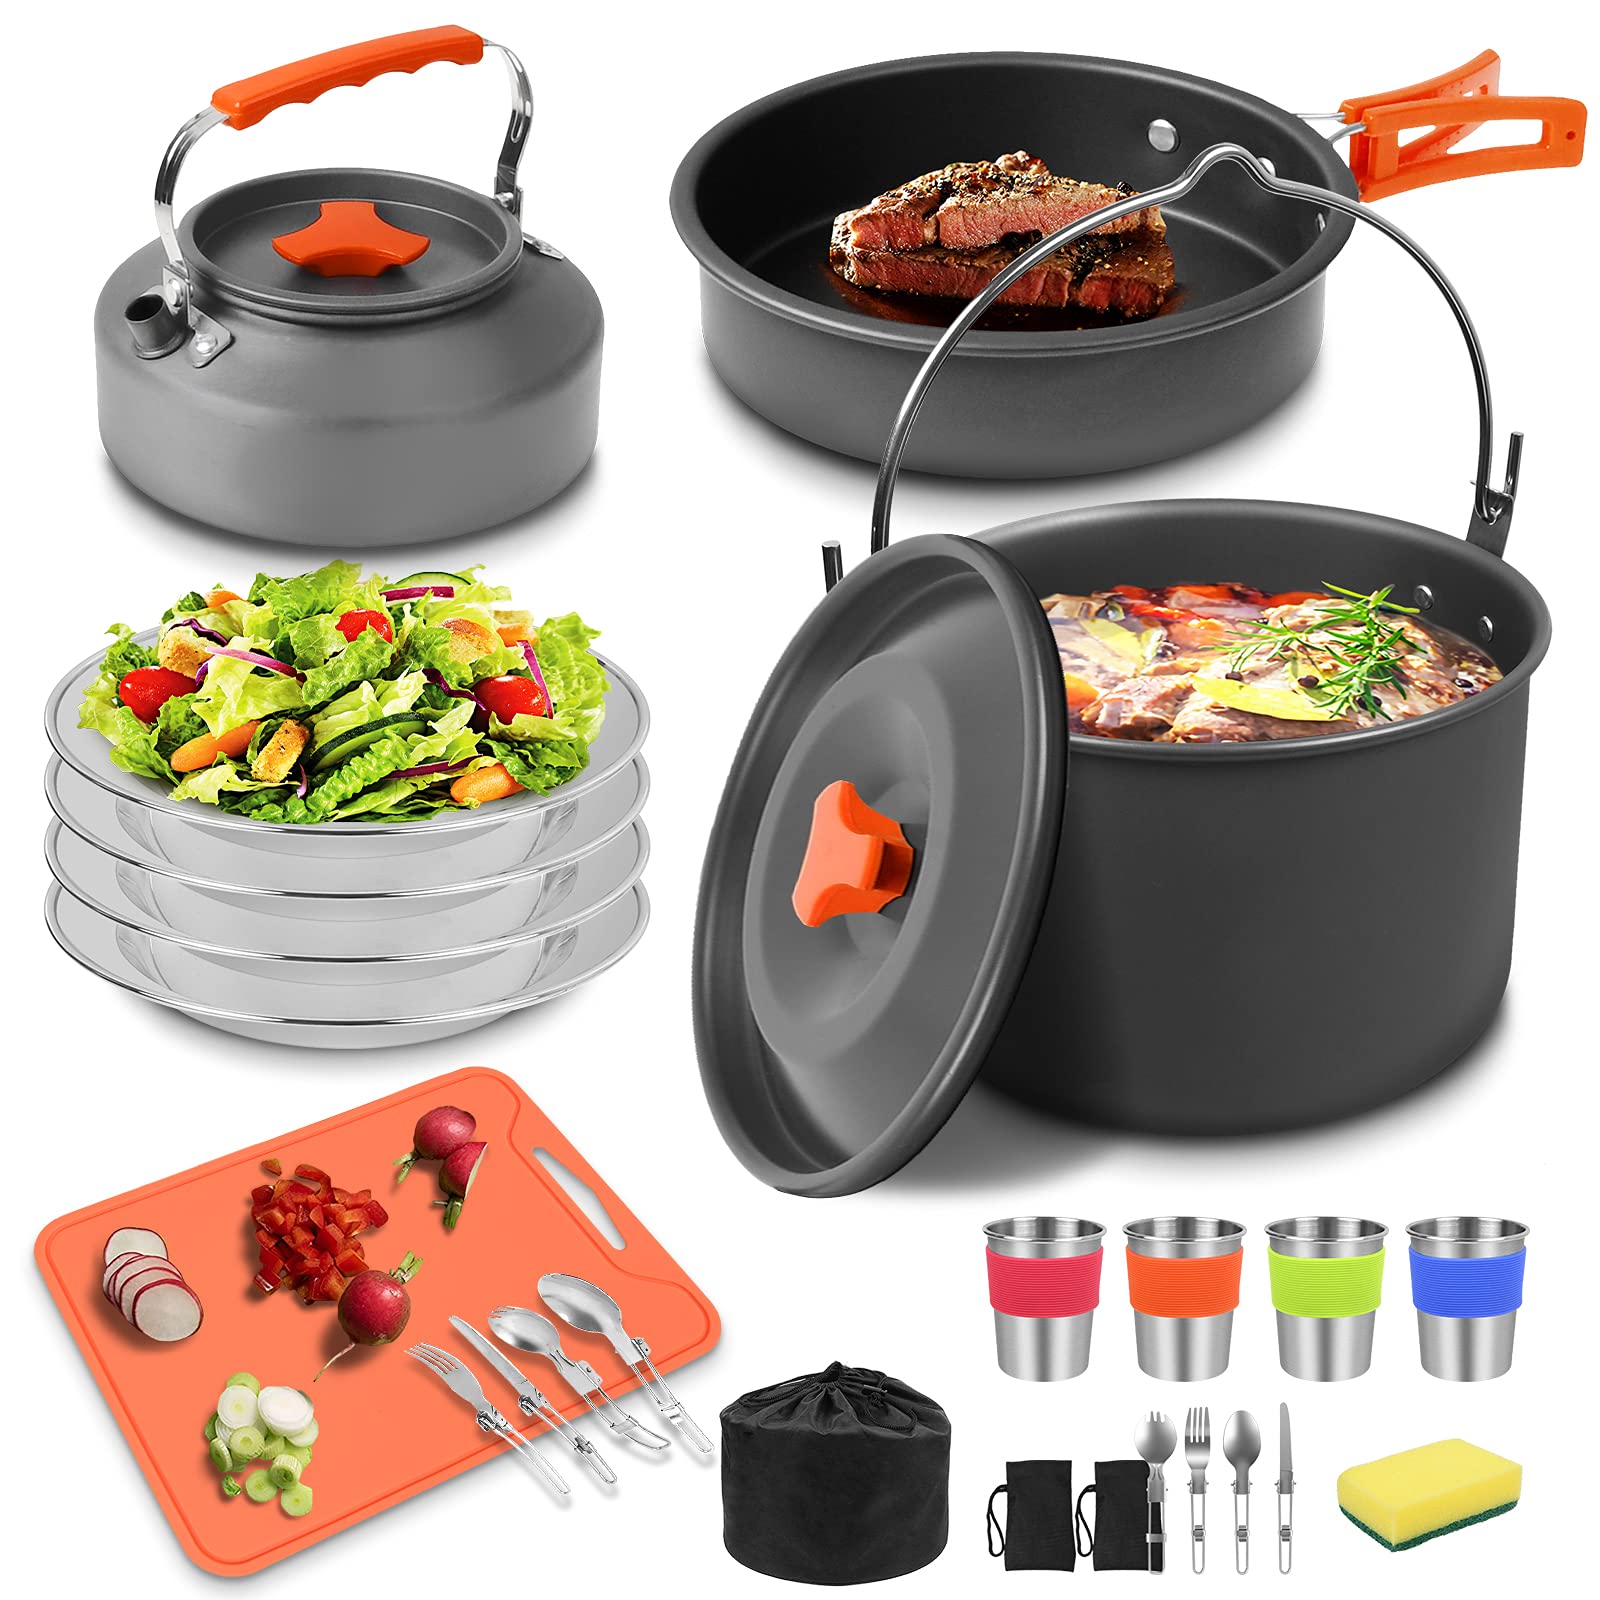 Camping Cooking Cookware Set 31pcs, Outside Camping Hanging Pot Pan and Kettle Kit for 3-4 People Picnic Backpacking Hiking Fishing, Lightweight Camping Accessories Cooking Set (Orange)